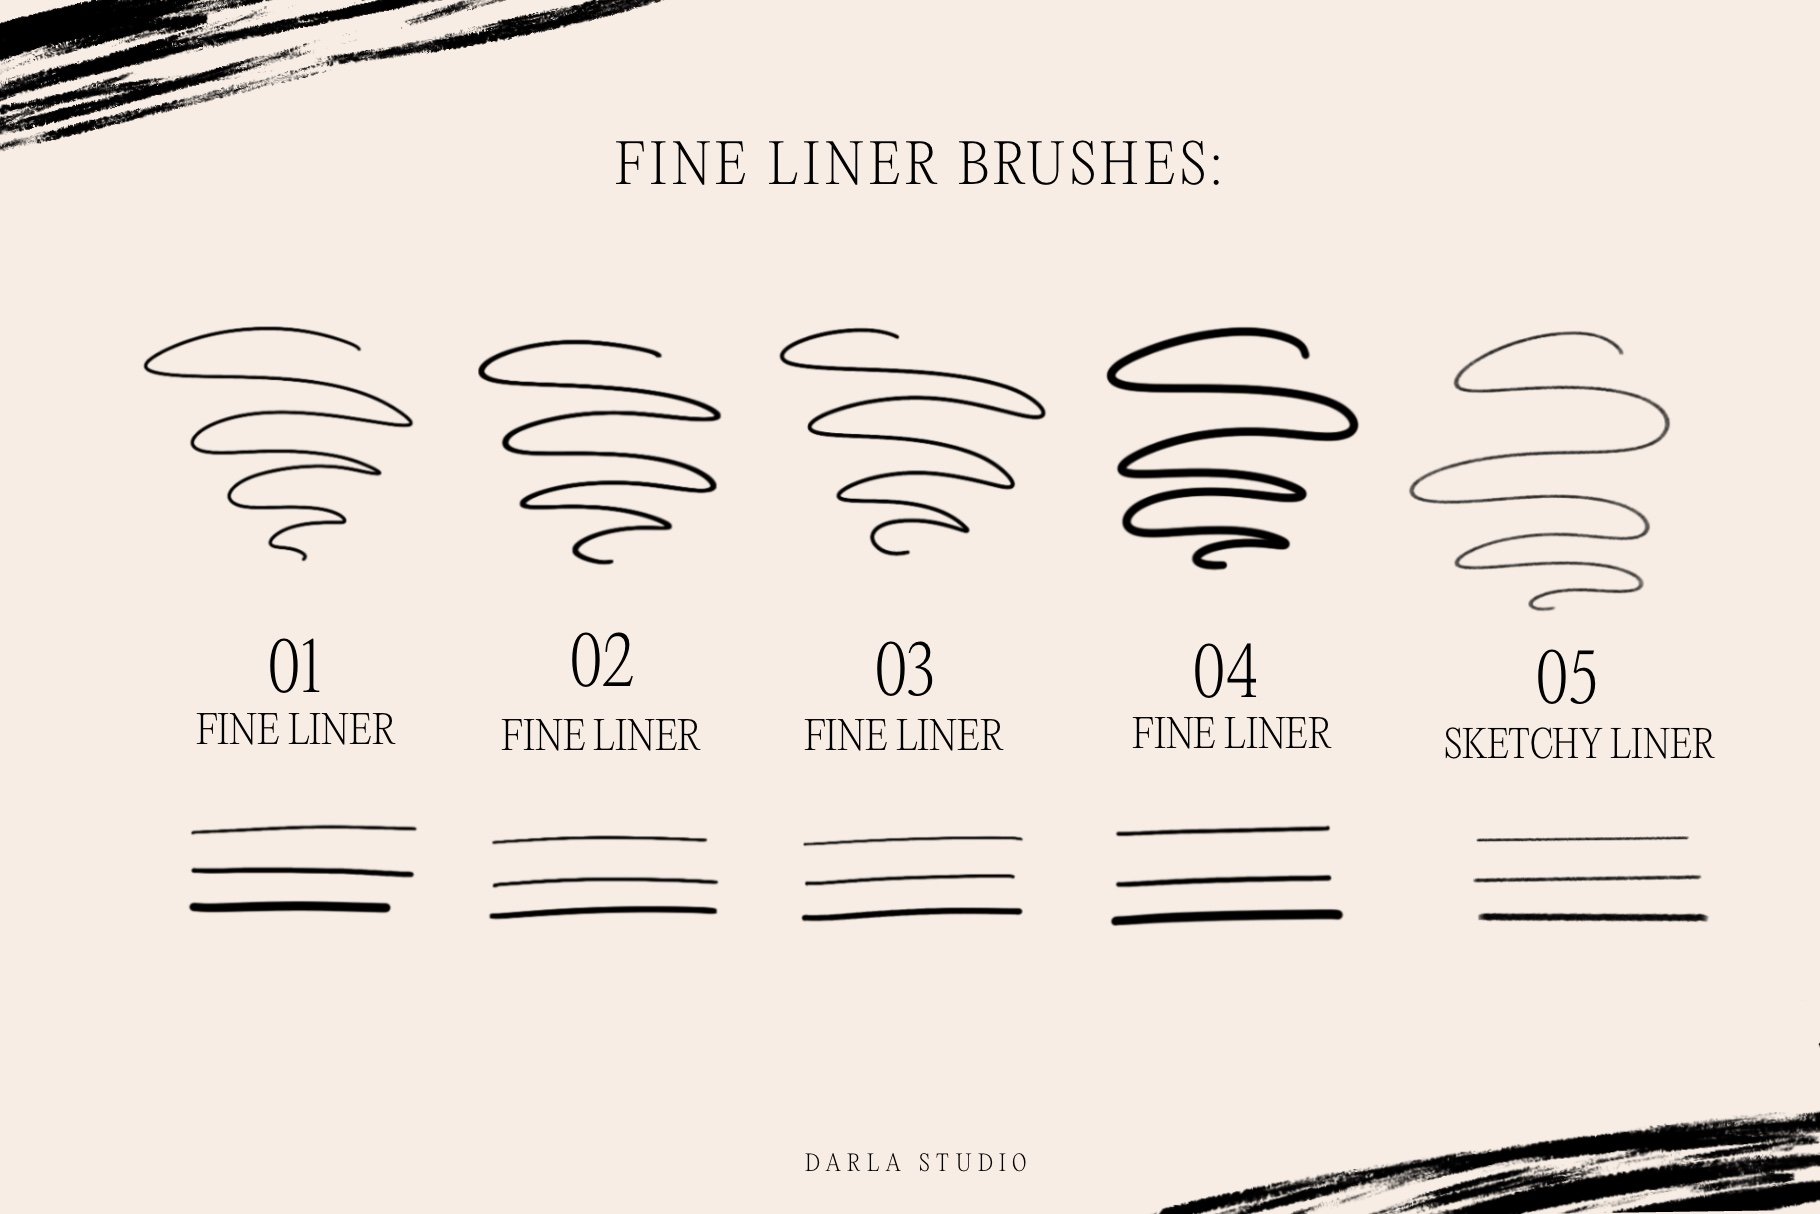 Ink Fine Liners Brushes for Procreate. By LABFcreations